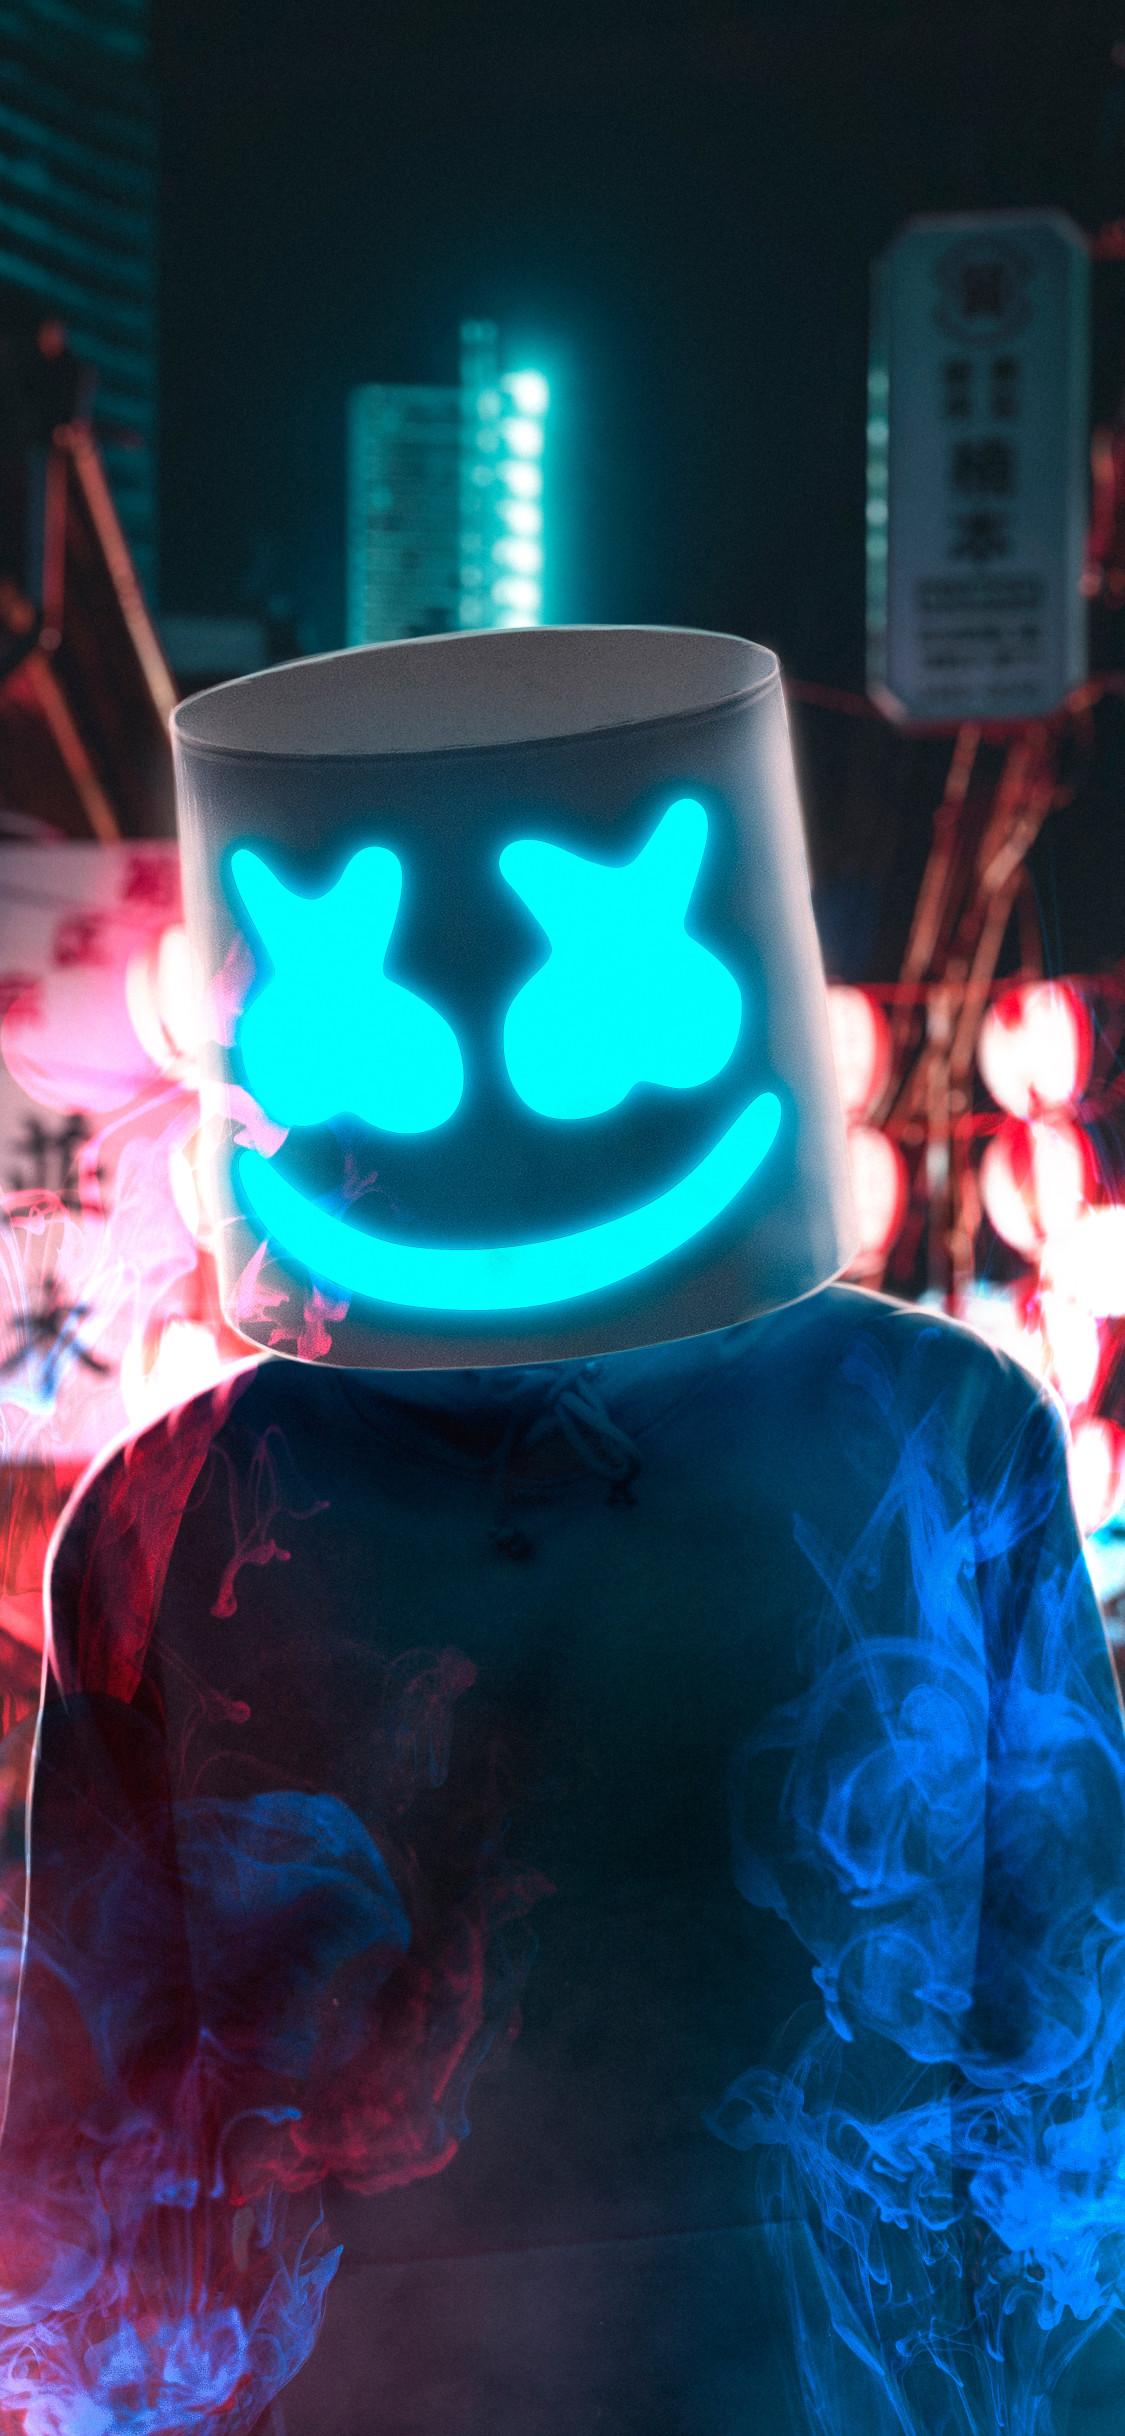 Marshmello iPhone Wallpapers - Wallpaper Cave